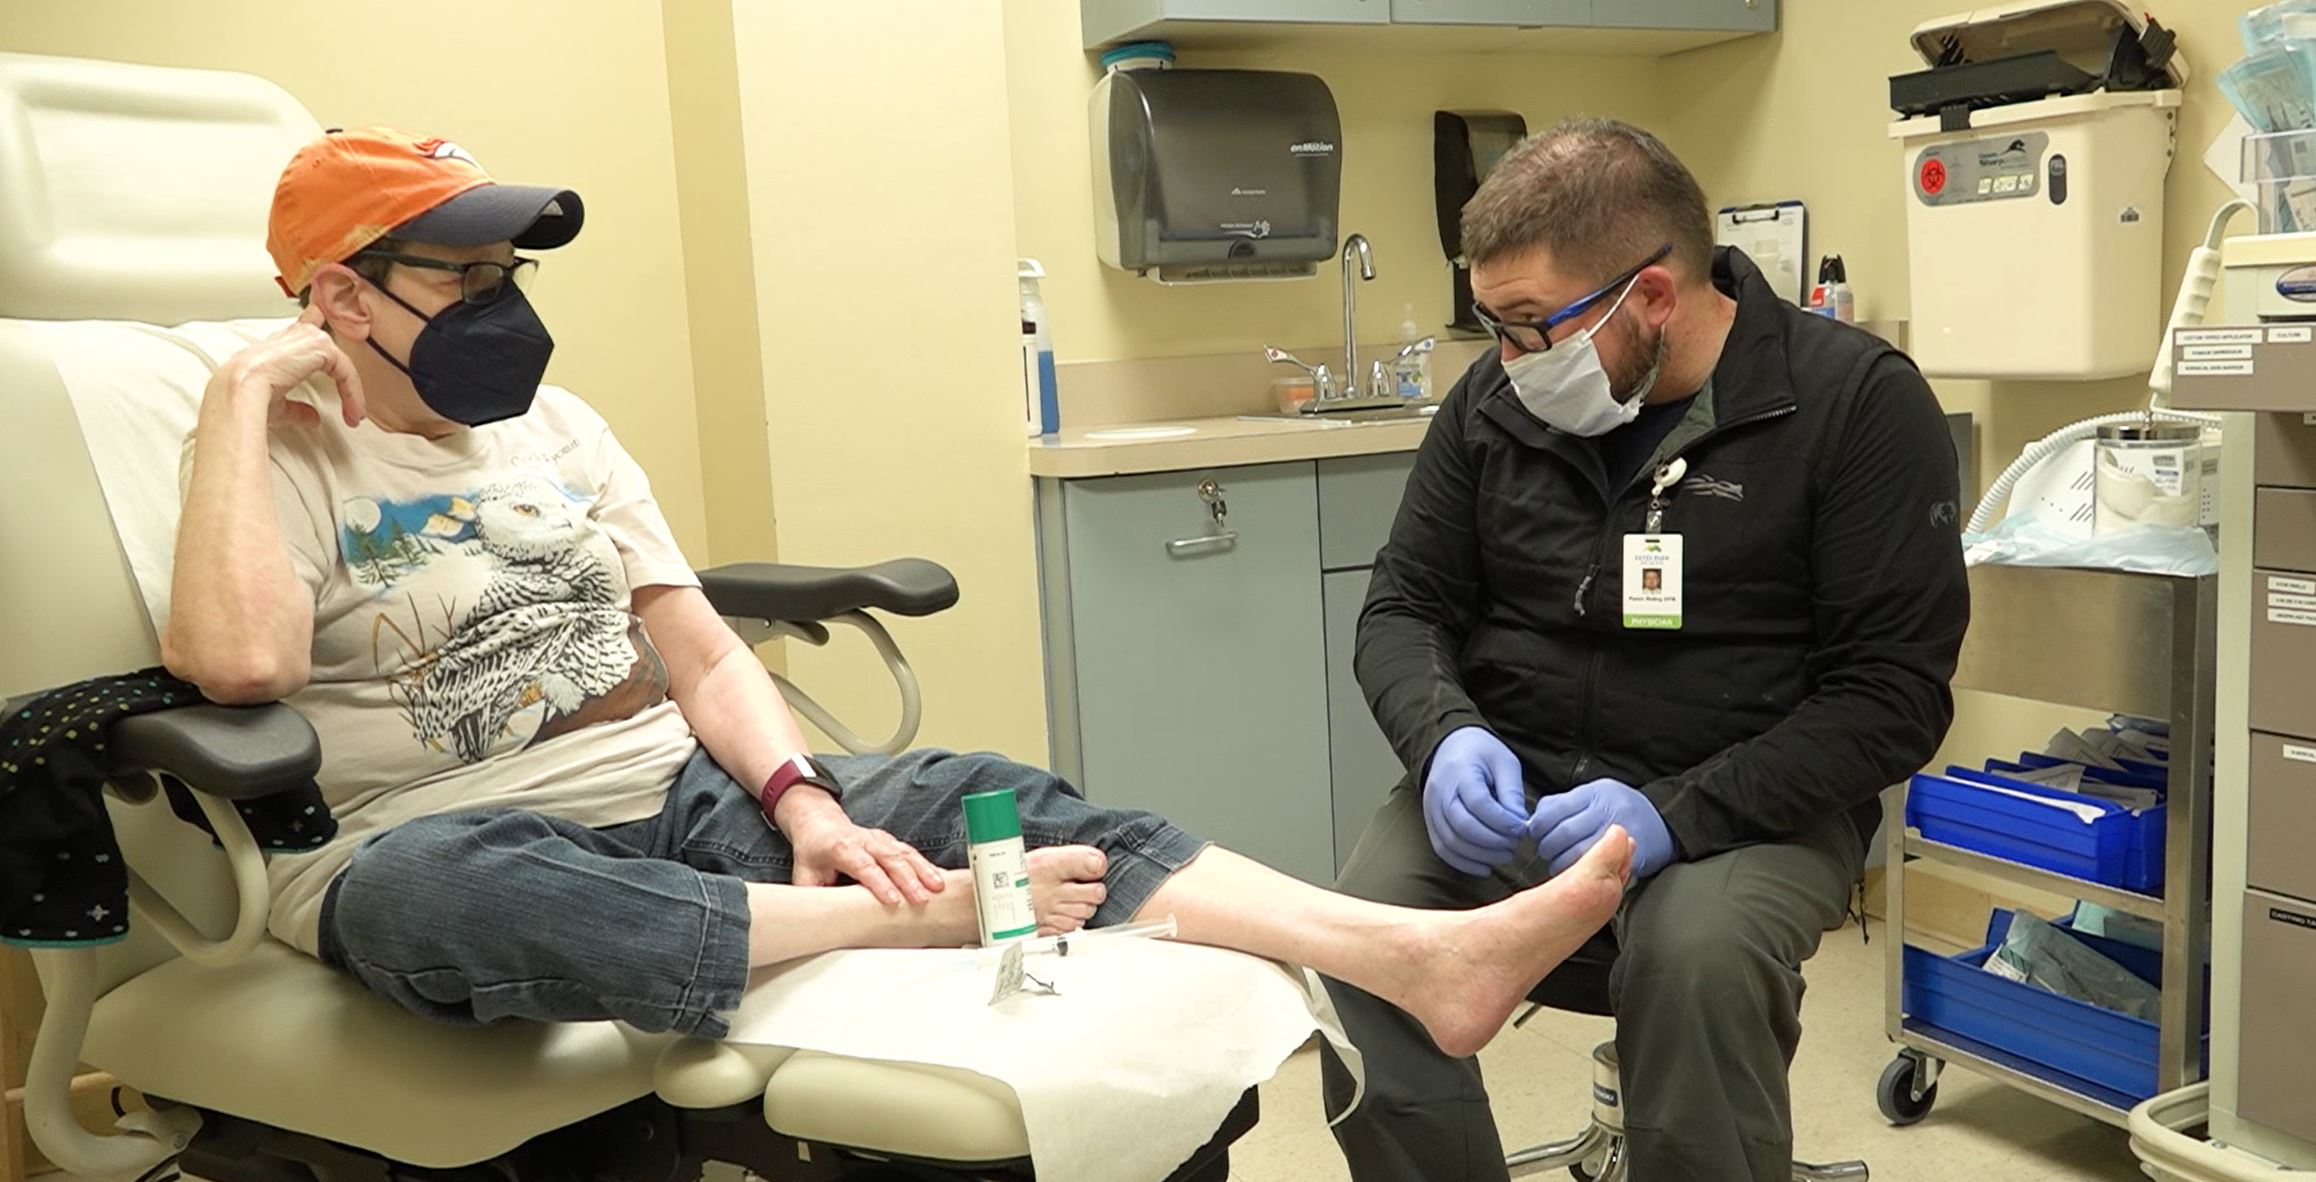 A healthcare worker in medical attire examines the foot of a seated patient in a clinical setting; both are wearing masks. The patient is in casual clothes and appears to be receiving foot care.